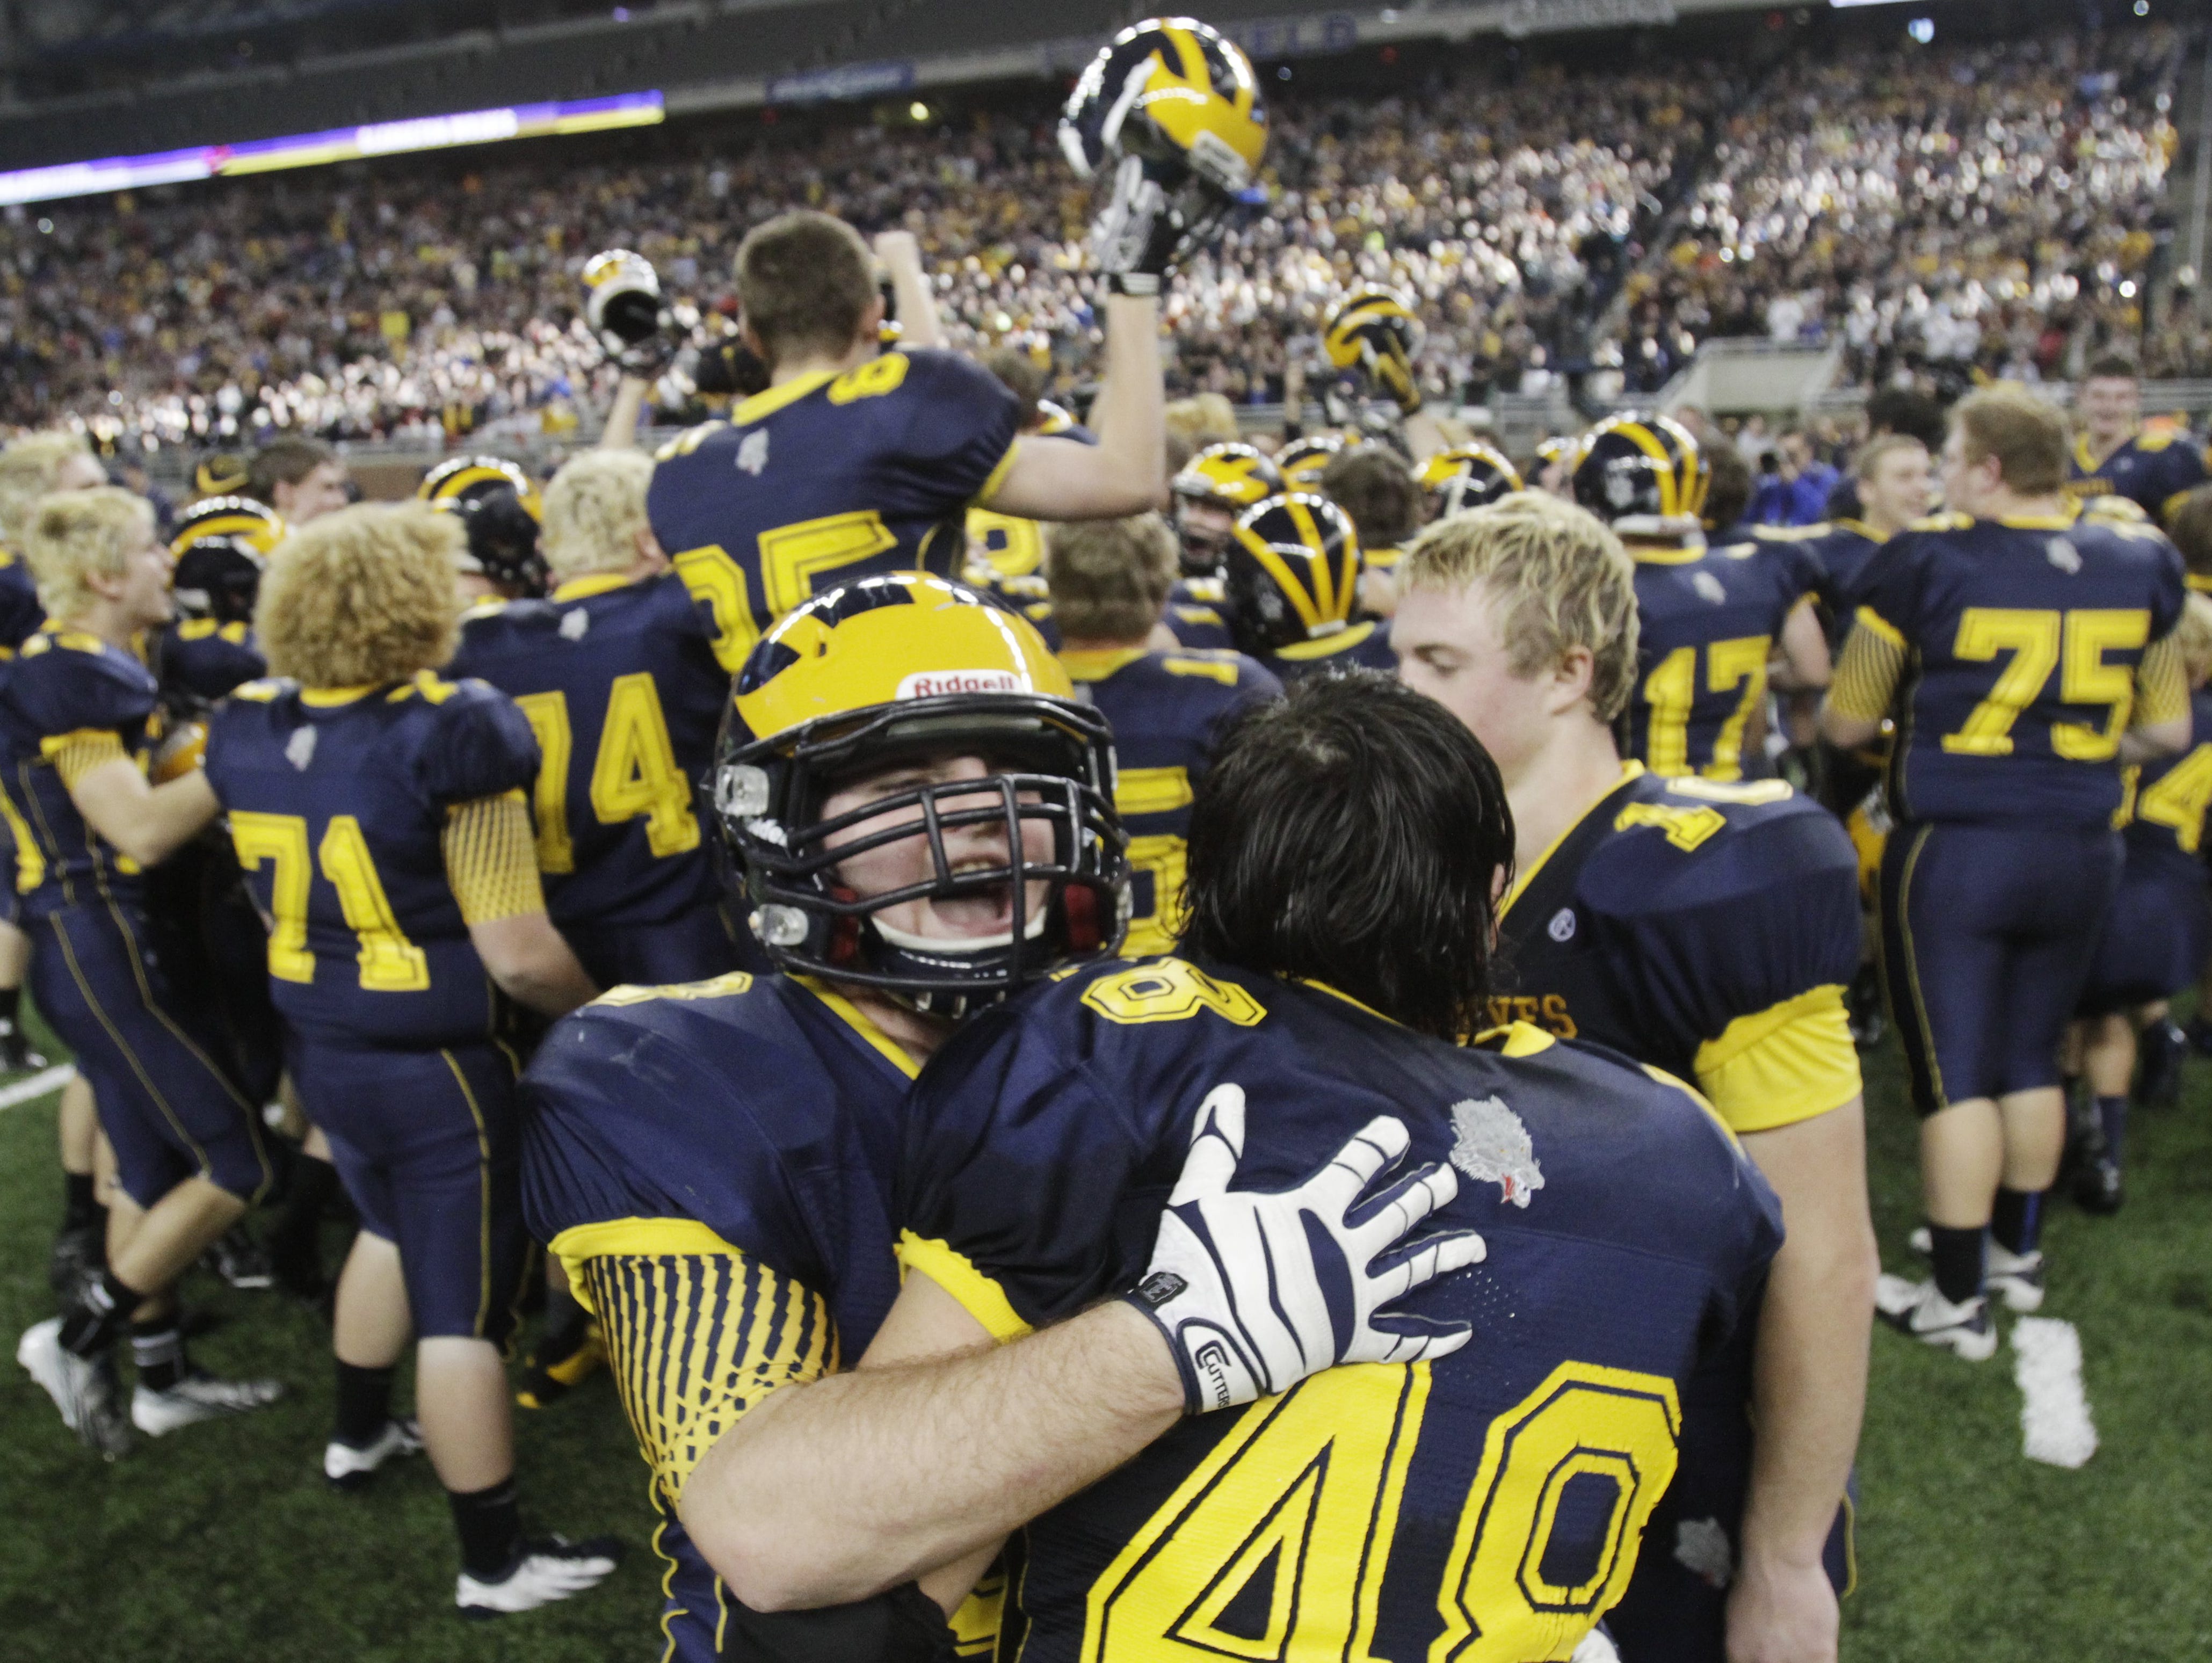 Clarkston players celebrate their Division 1 title win against Novi Detroit Catholic Central on Nov. 30, 2013, at Ford Field.